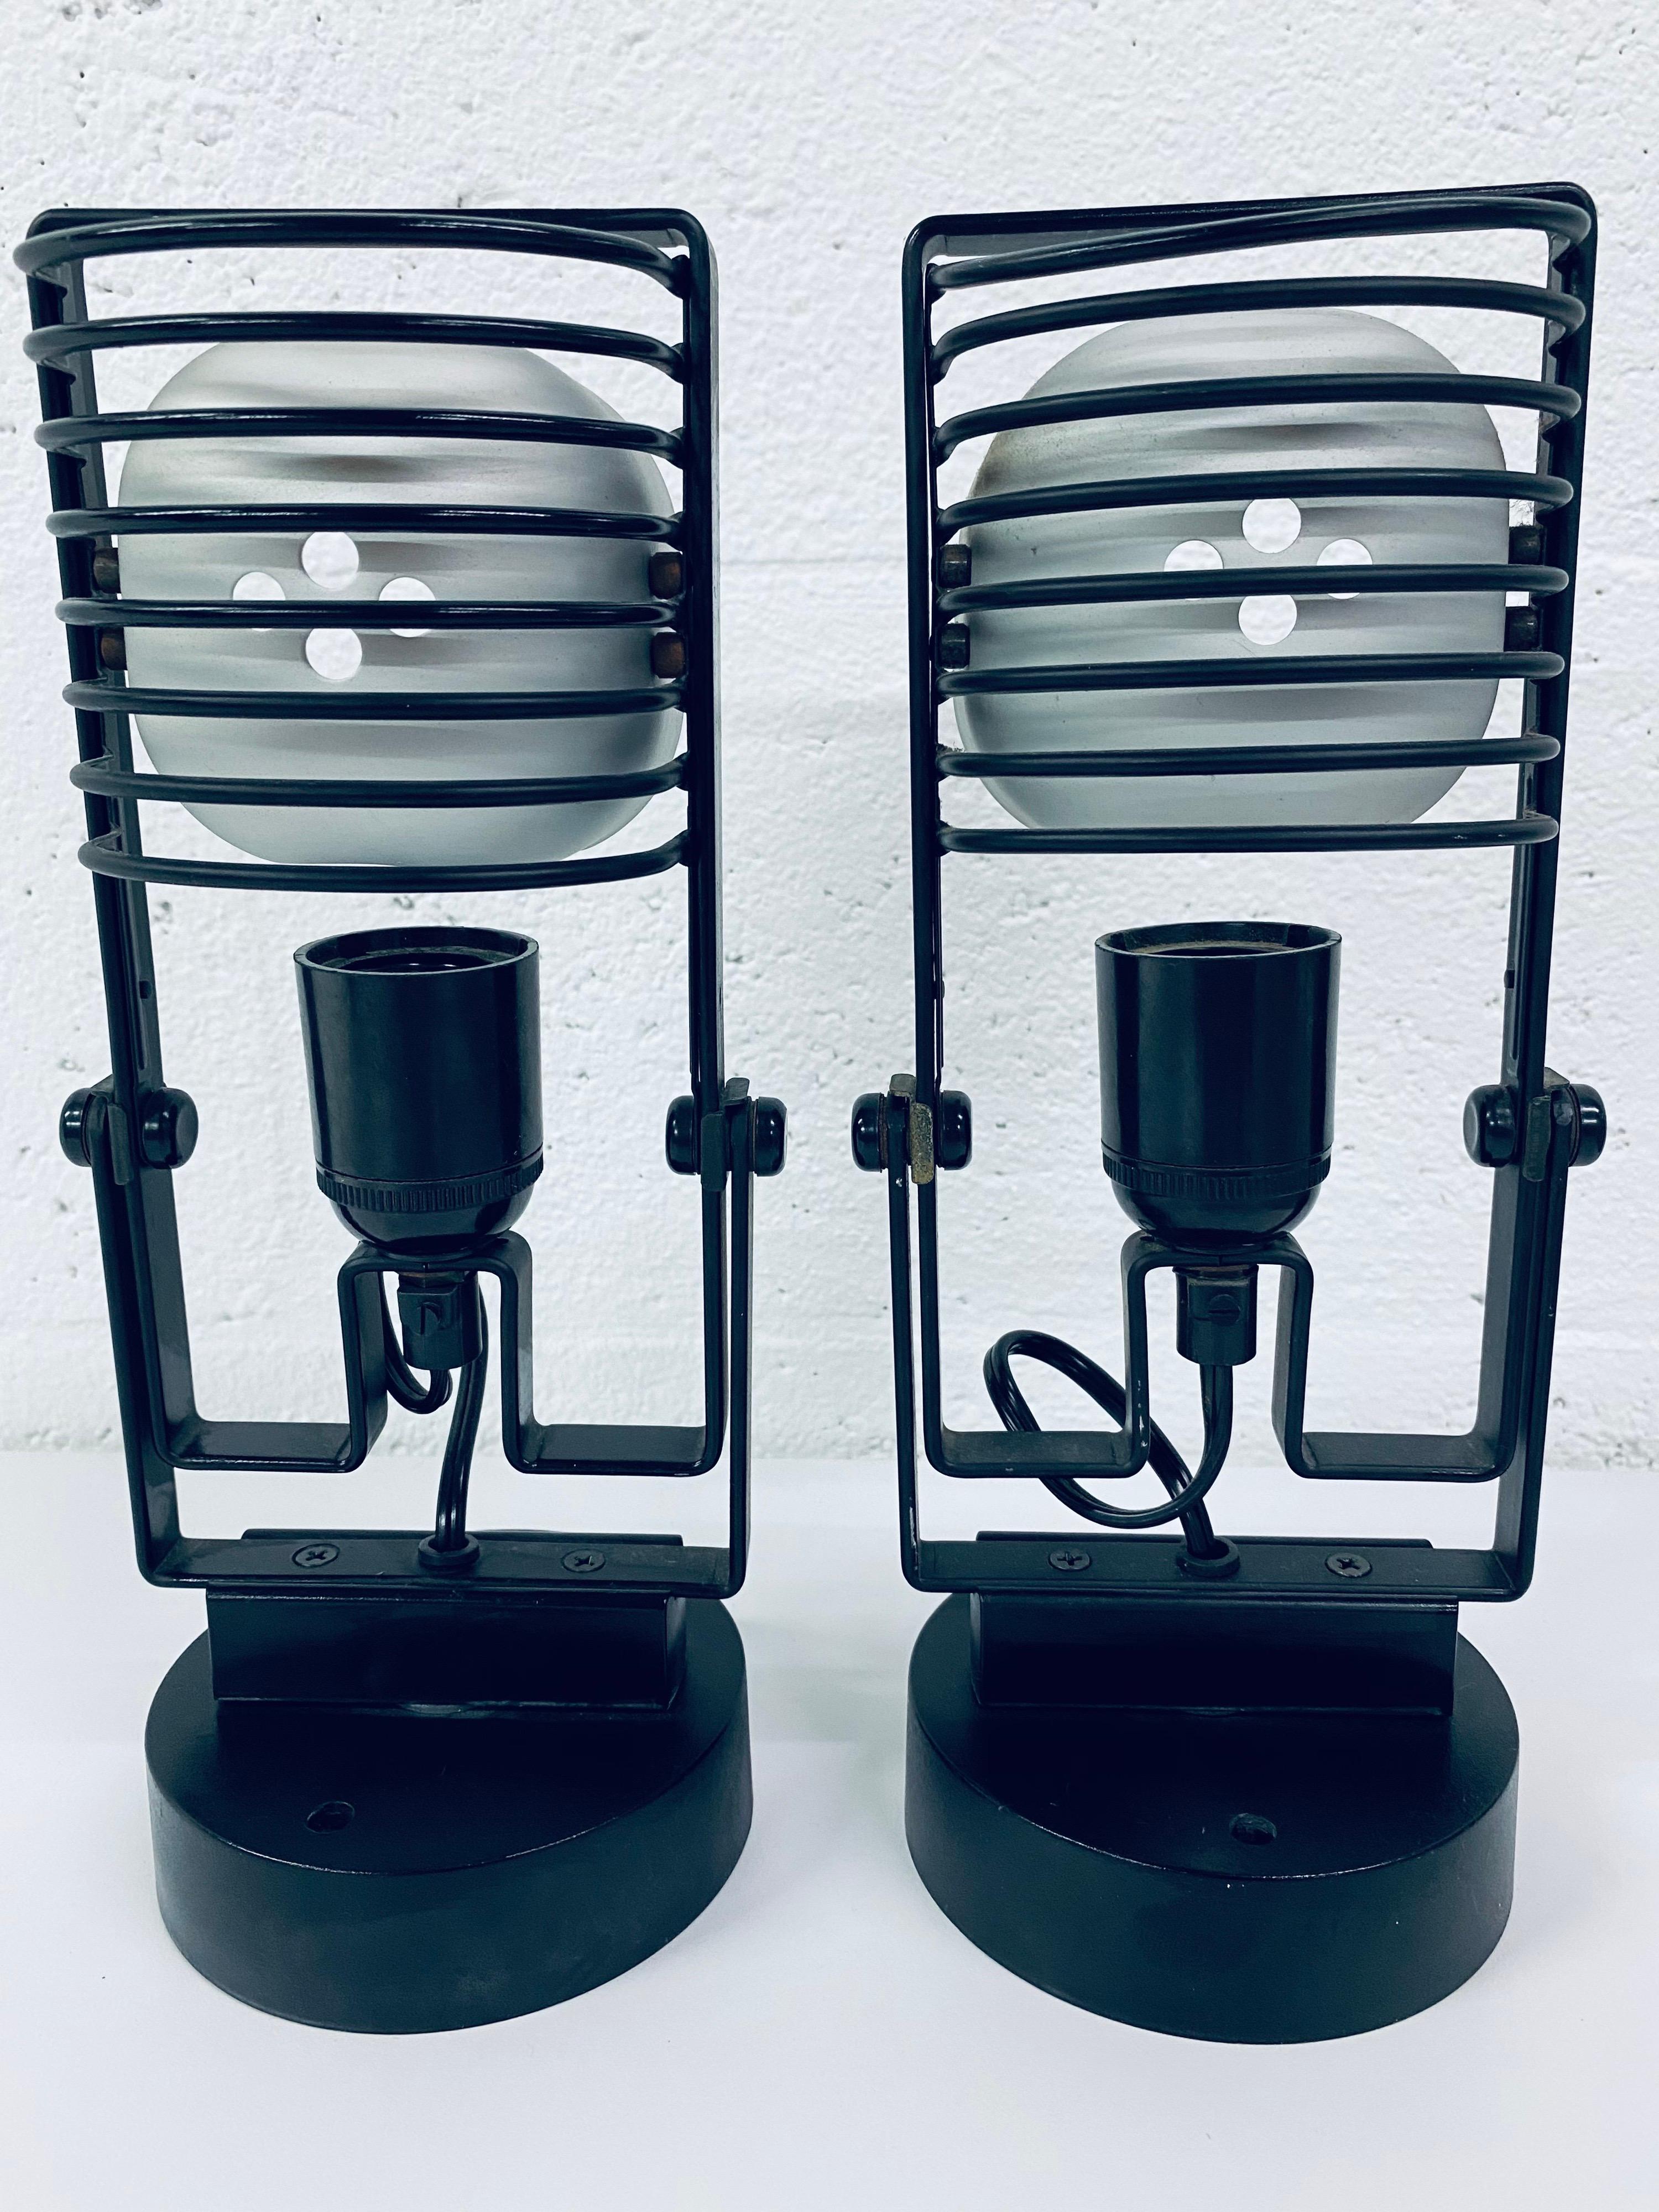 Rare pair of Ernesto Gismondi Sintesi adjustable wall scones for Artemide circa 1970s. Sconces rotate and tilt. No mounting plate required, only screws (not included).